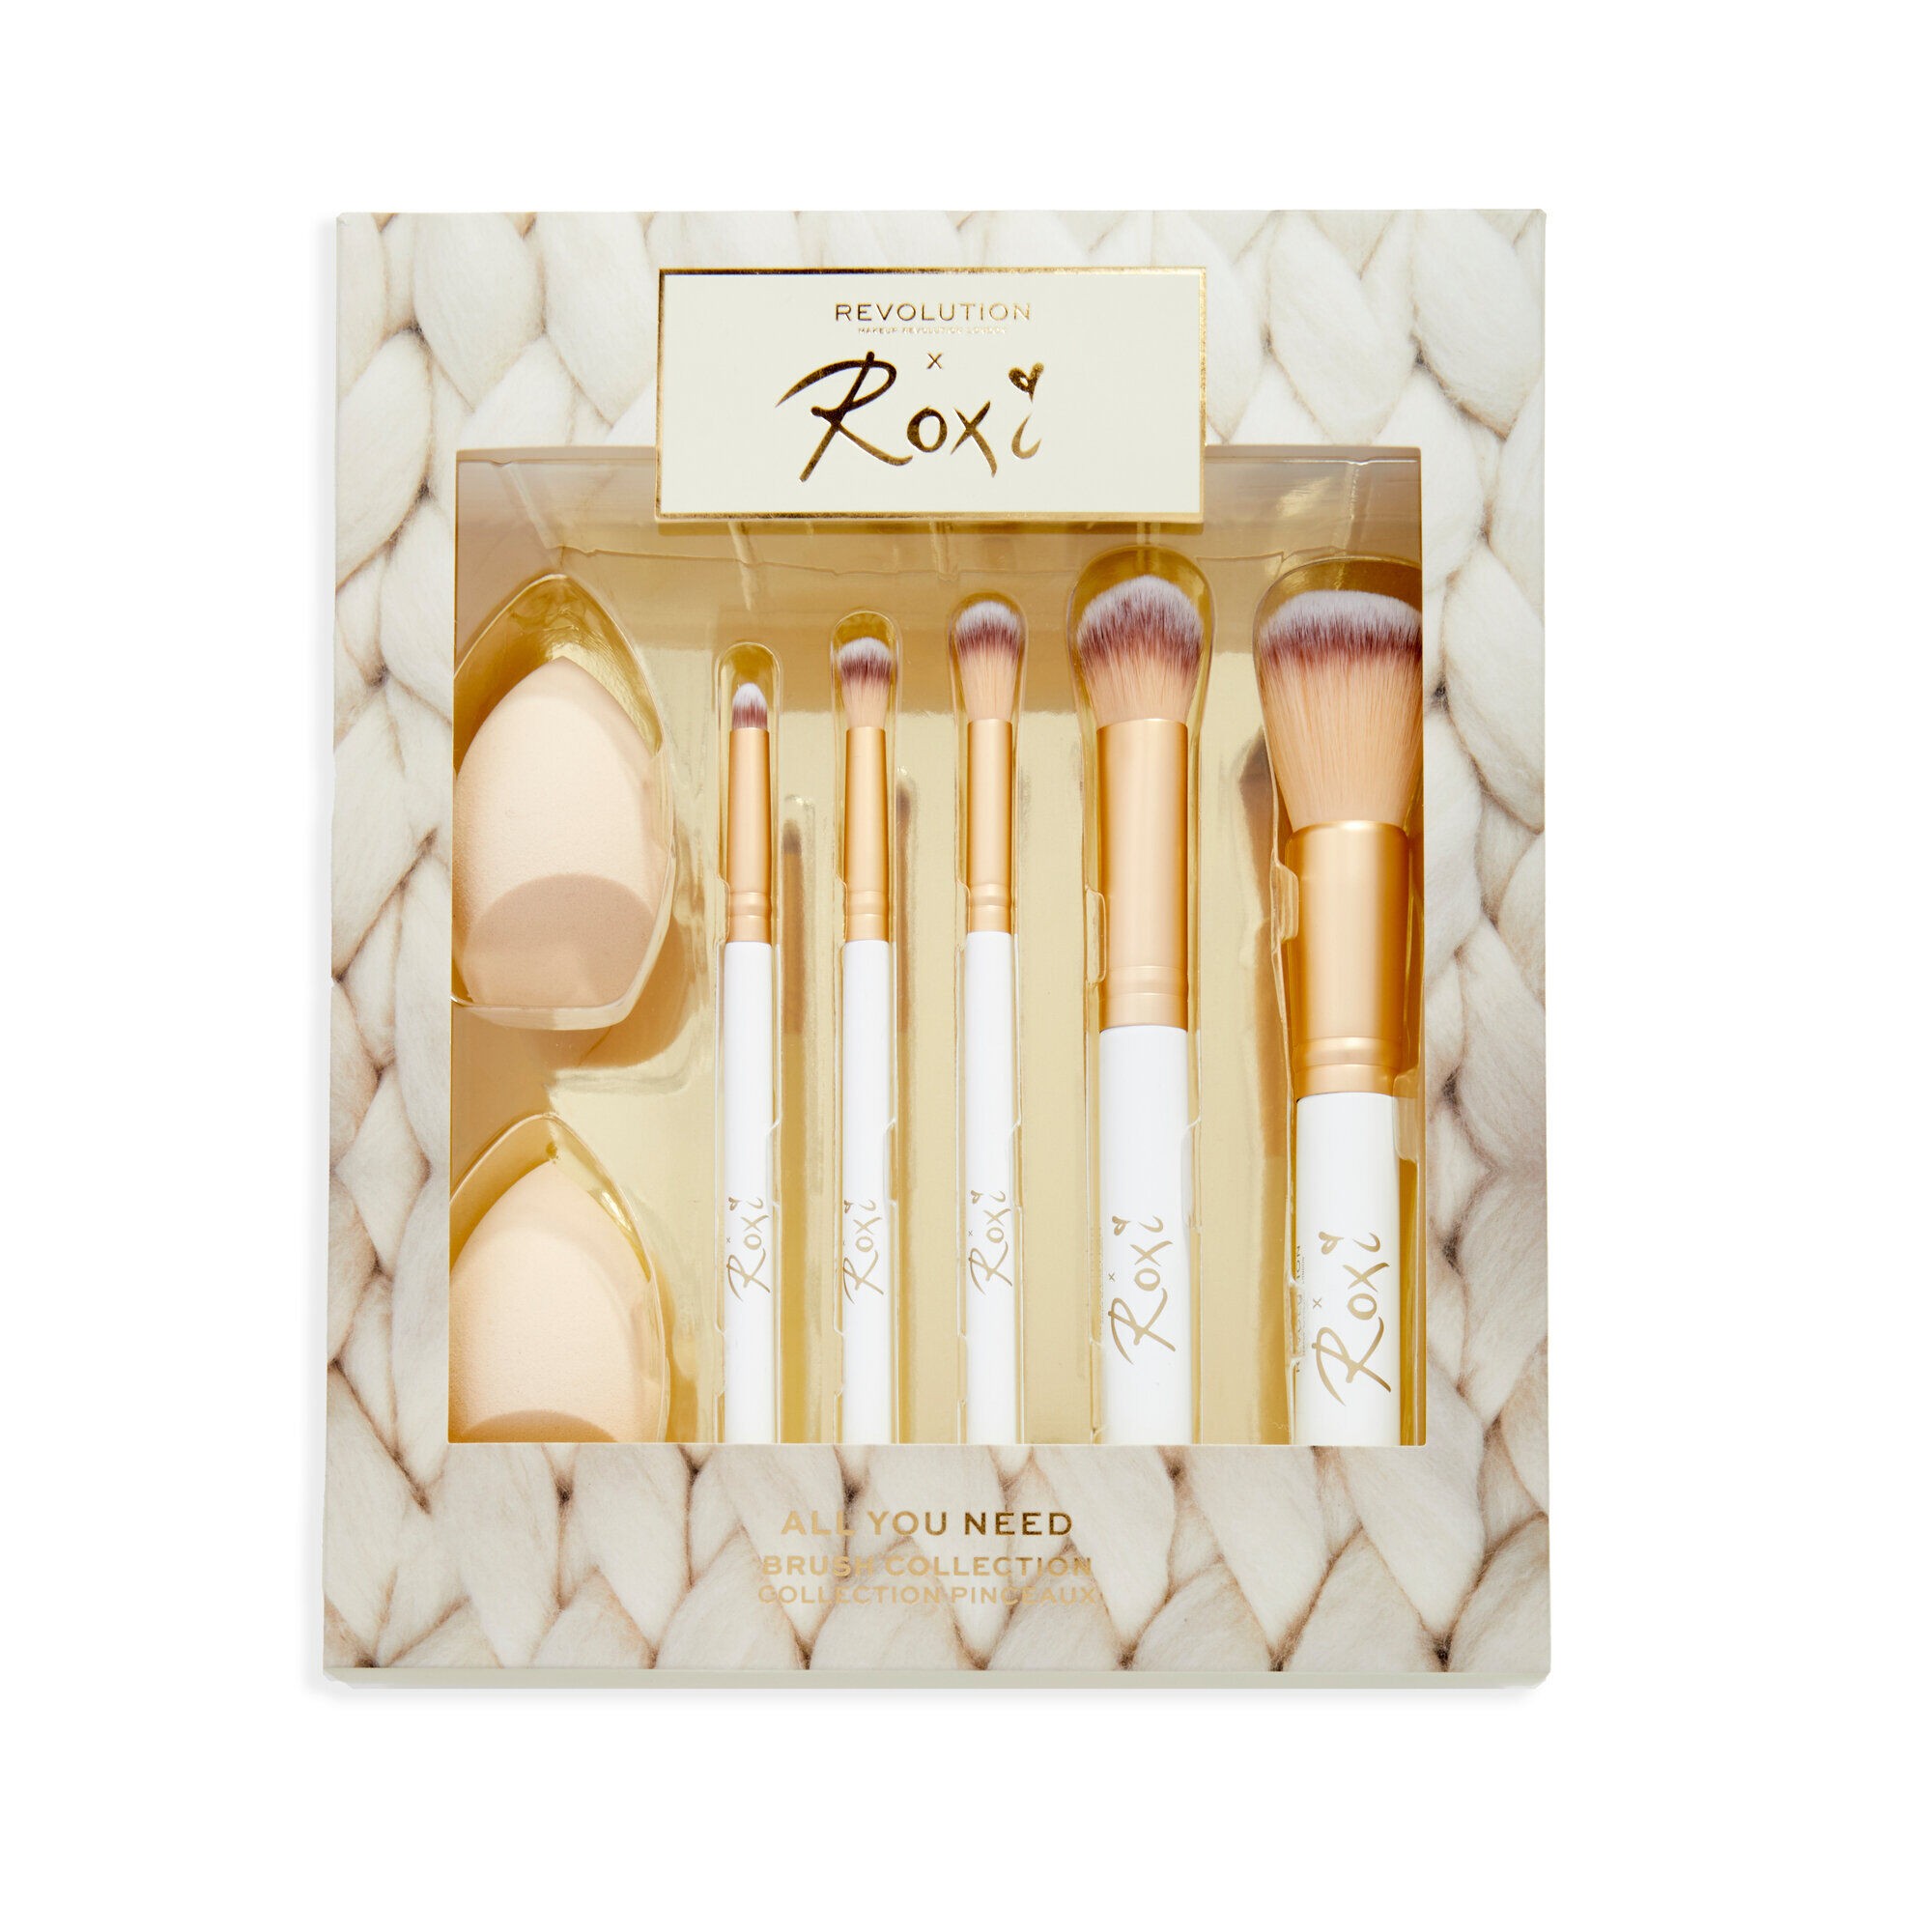 Revolution x Roxi All You Need Brush Collection